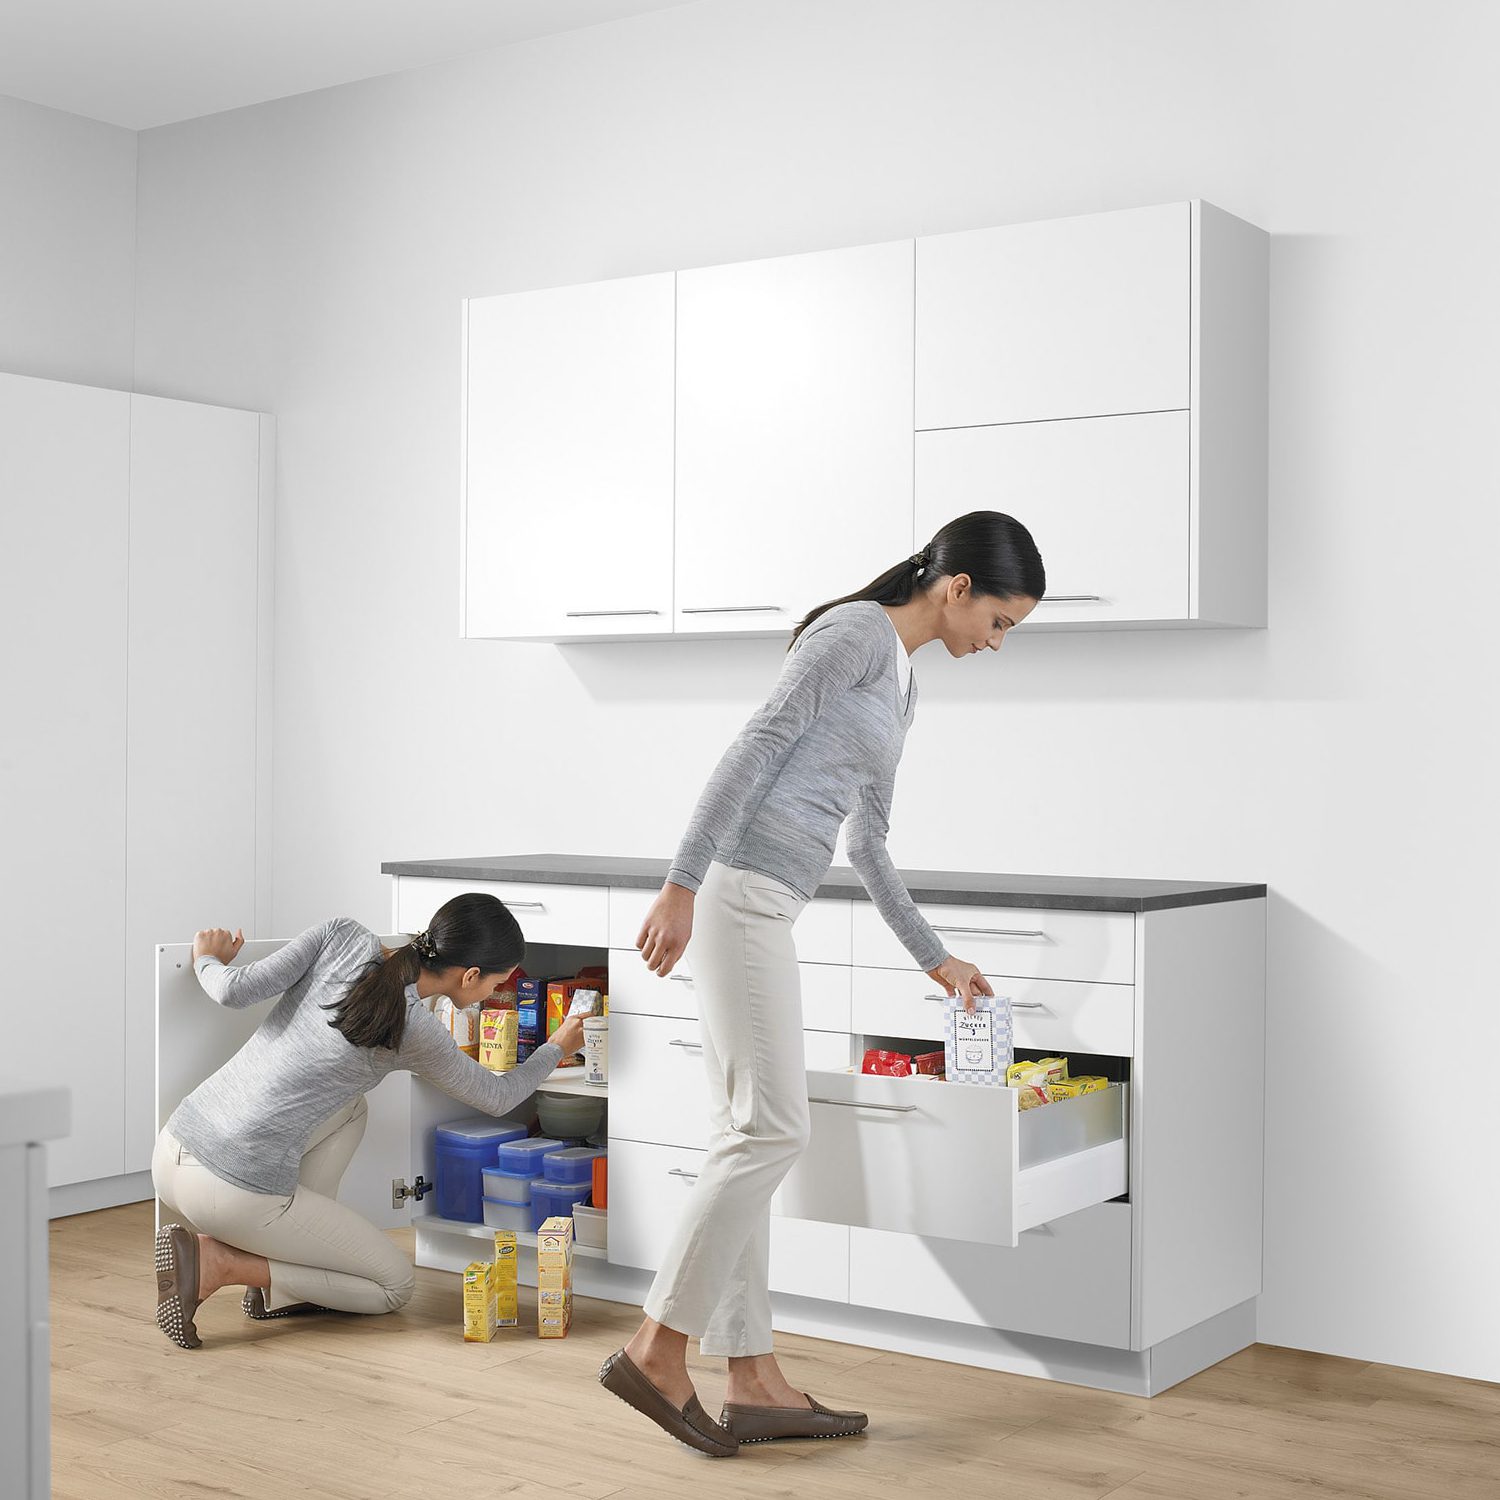 Save time and effort with Antaro drawers in the base cabinets